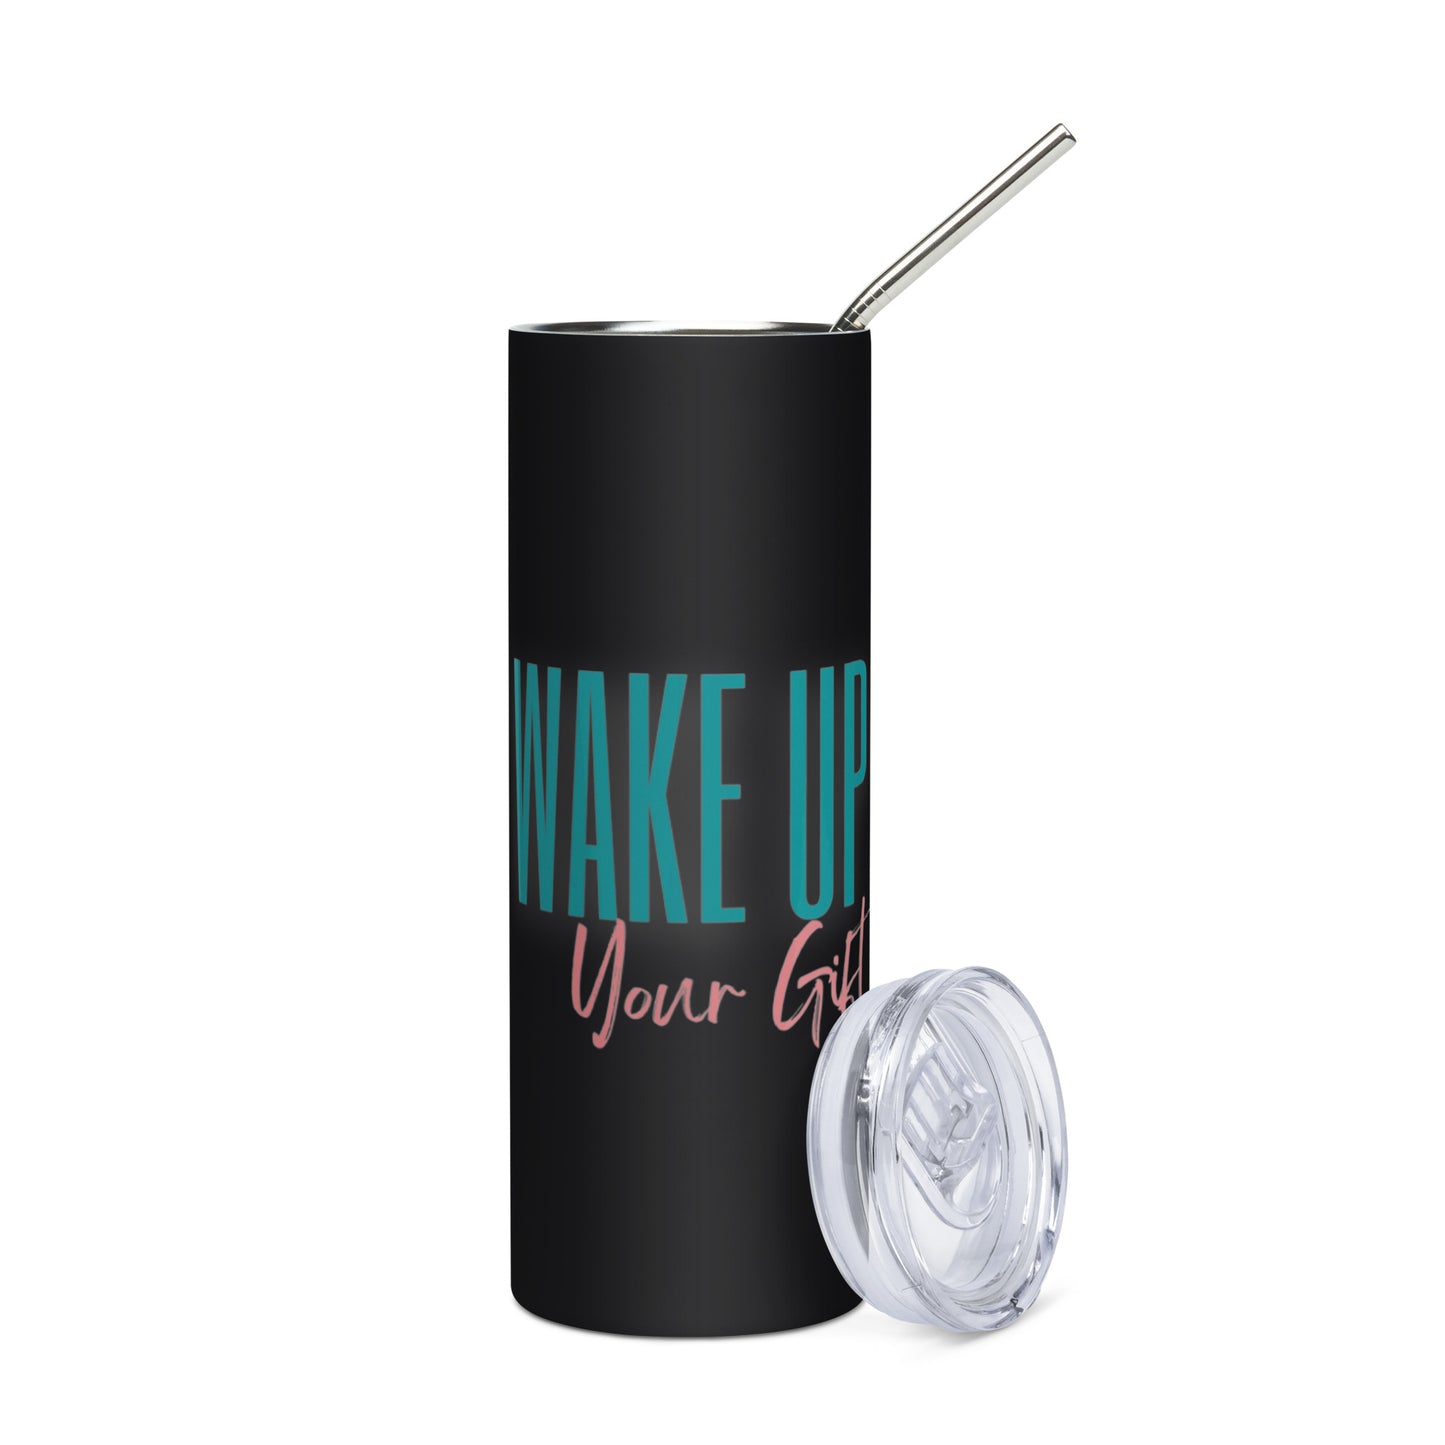 Wake Up Your Gift Stainless steel tumbler